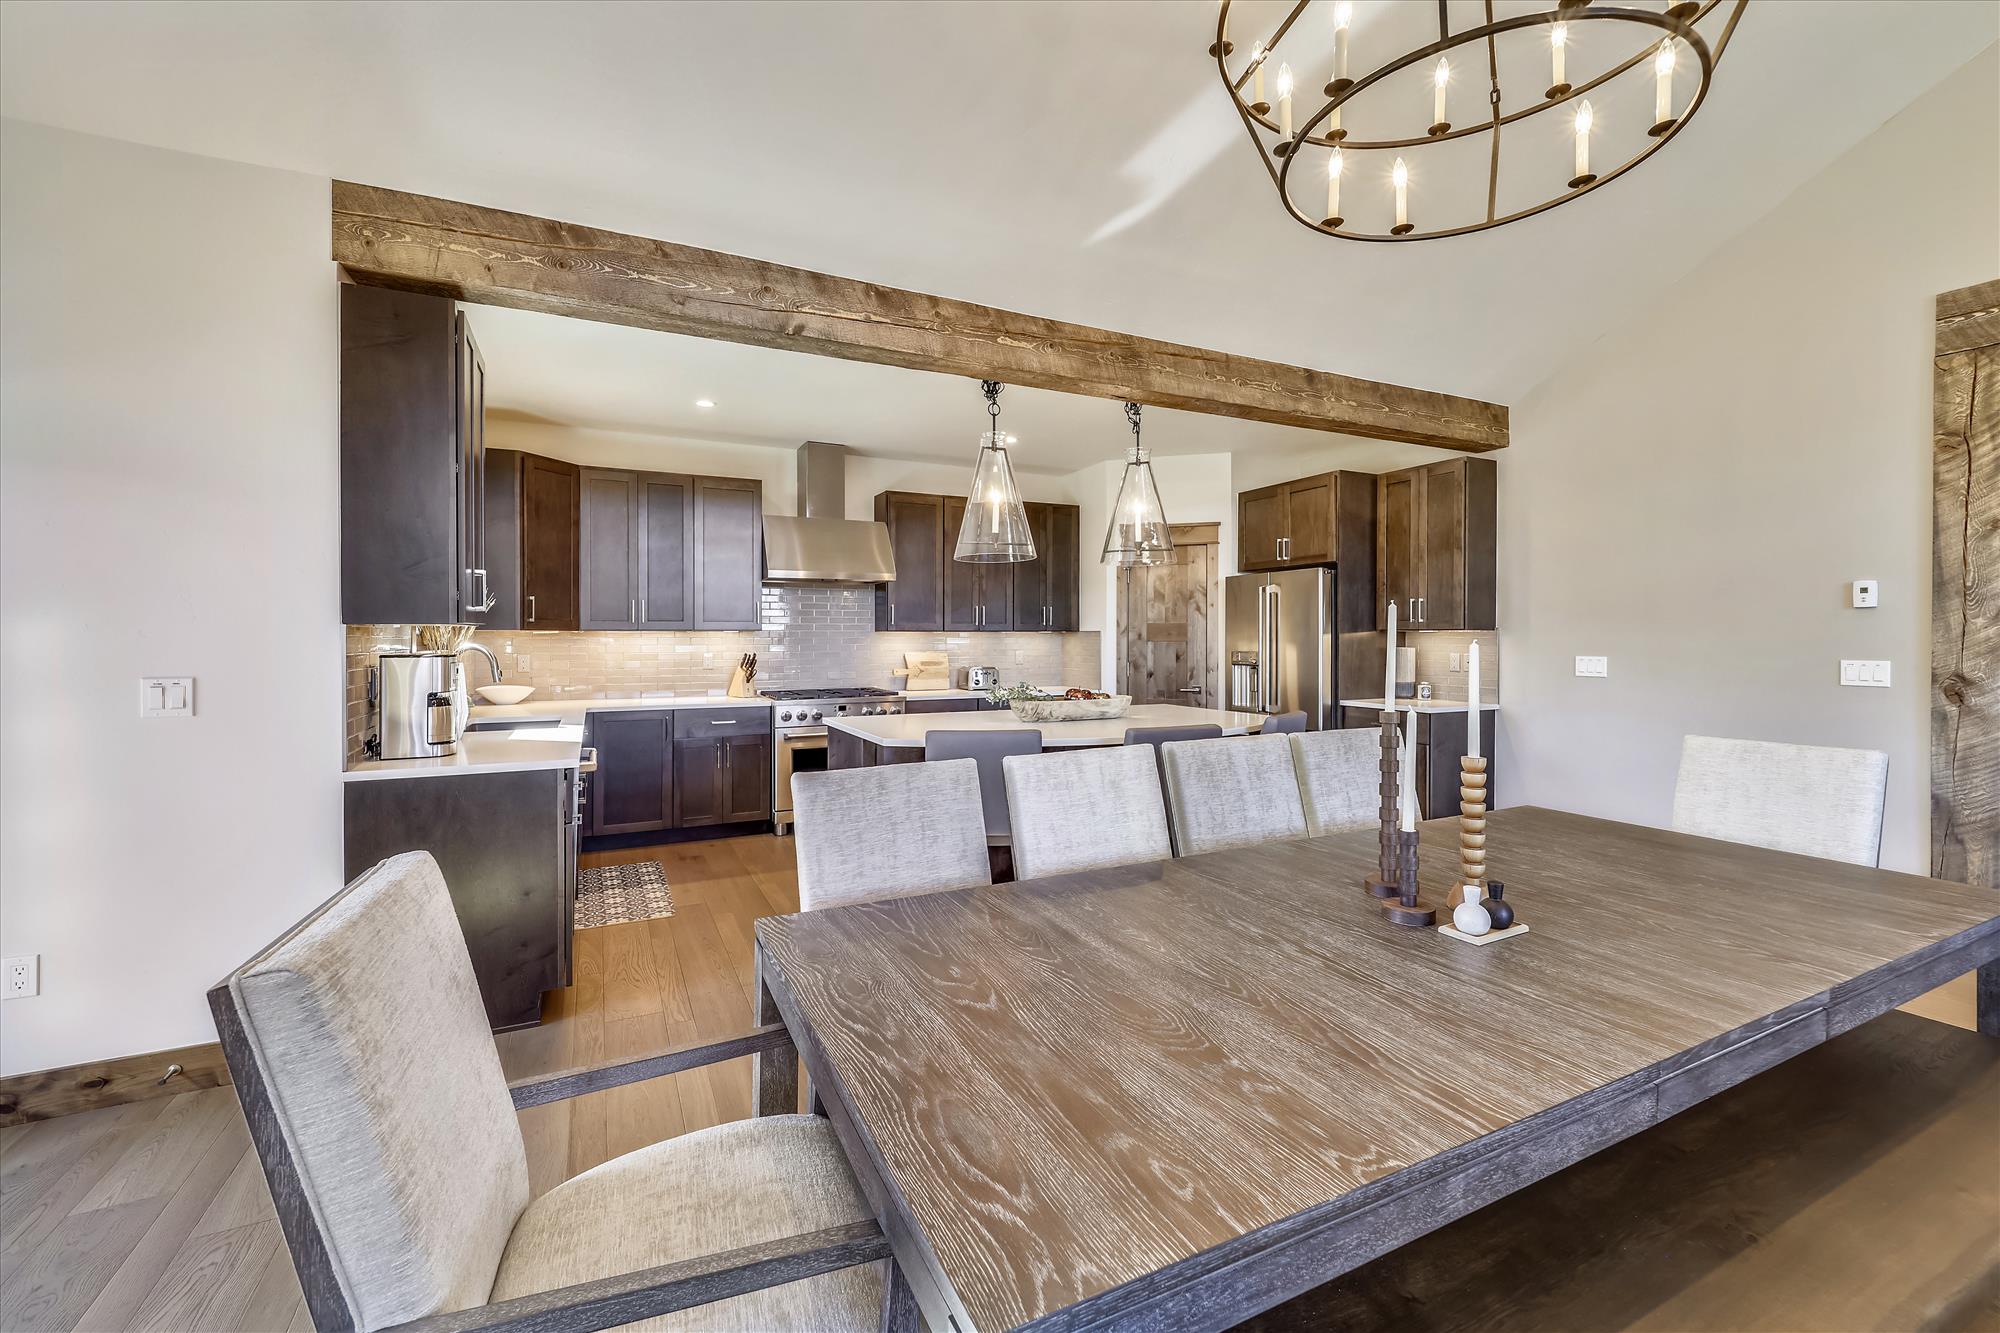 Seating for 10 at the dining table - Cocoa Cabin Breckenridge Vacation Rental